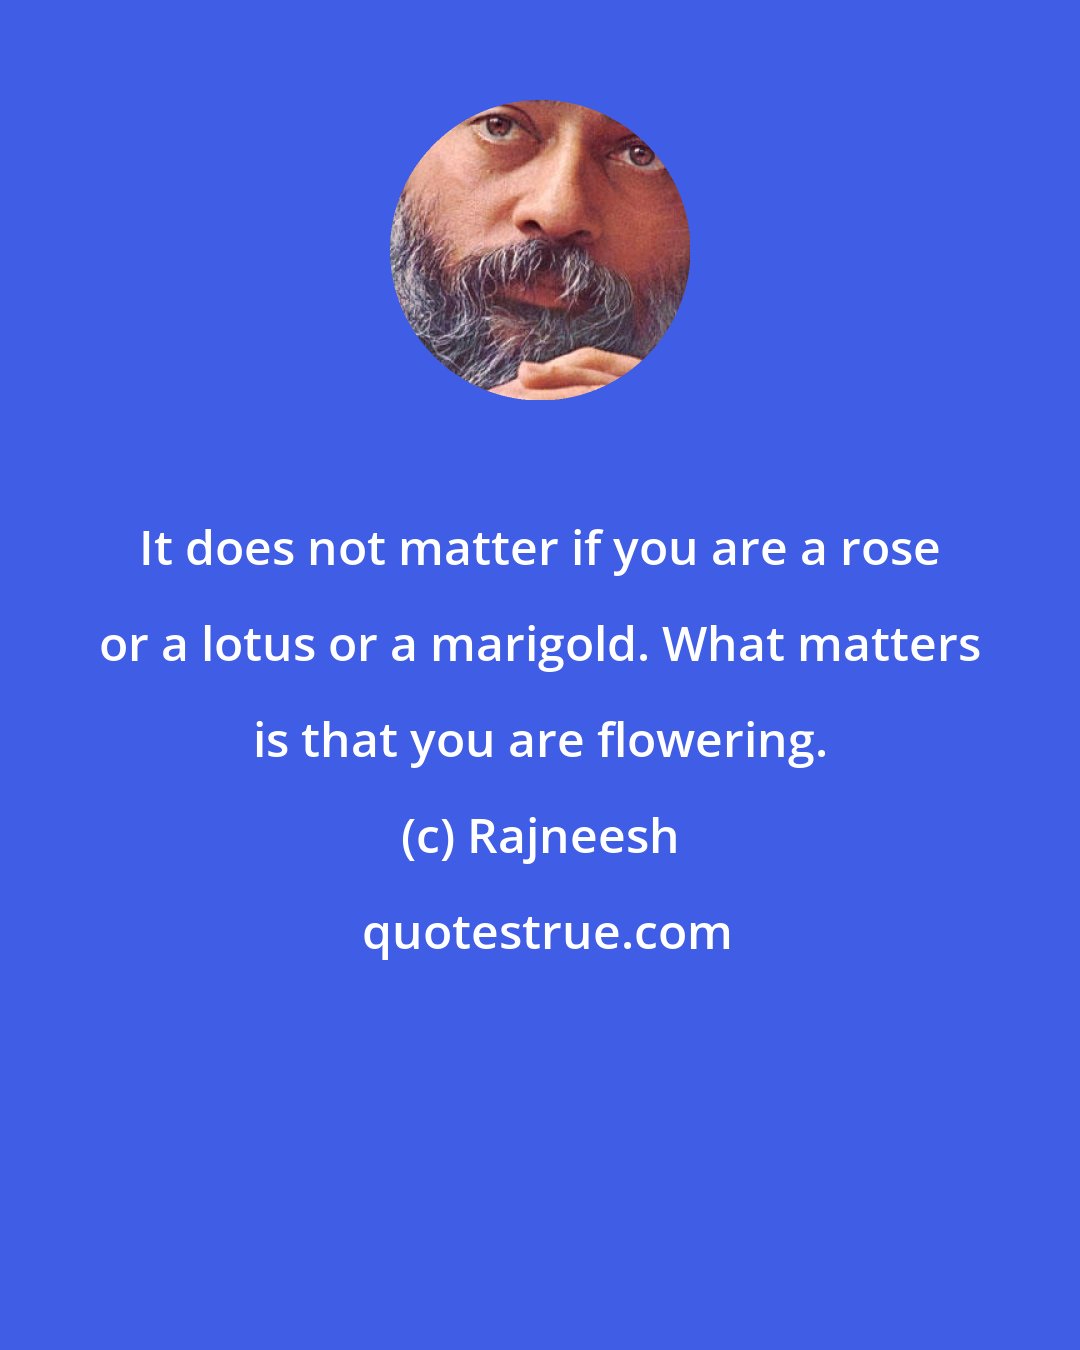 Rajneesh: It does not matter if you are a rose or a lotus or a marigold. What matters is that you are flowering.